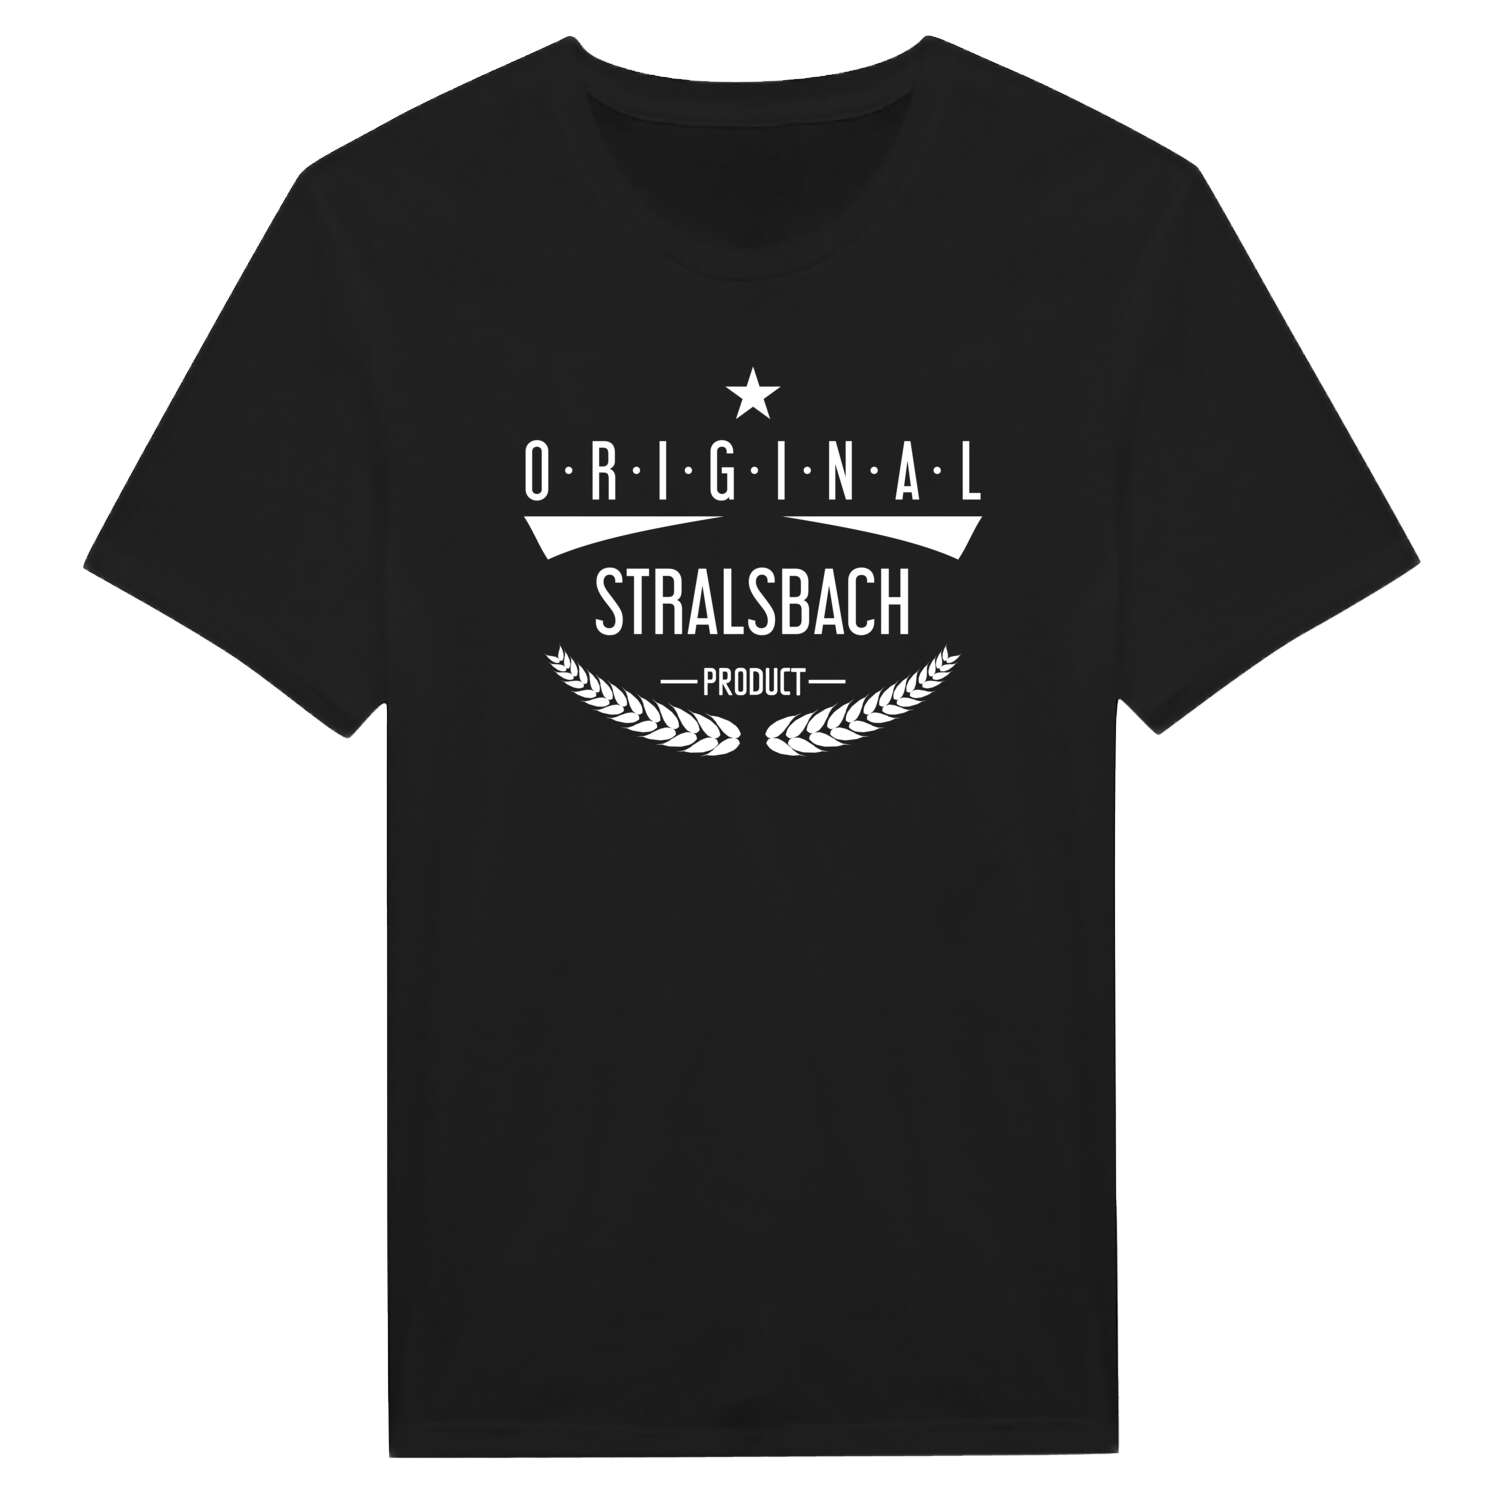 Stralsbach T-Shirt »Original Product«